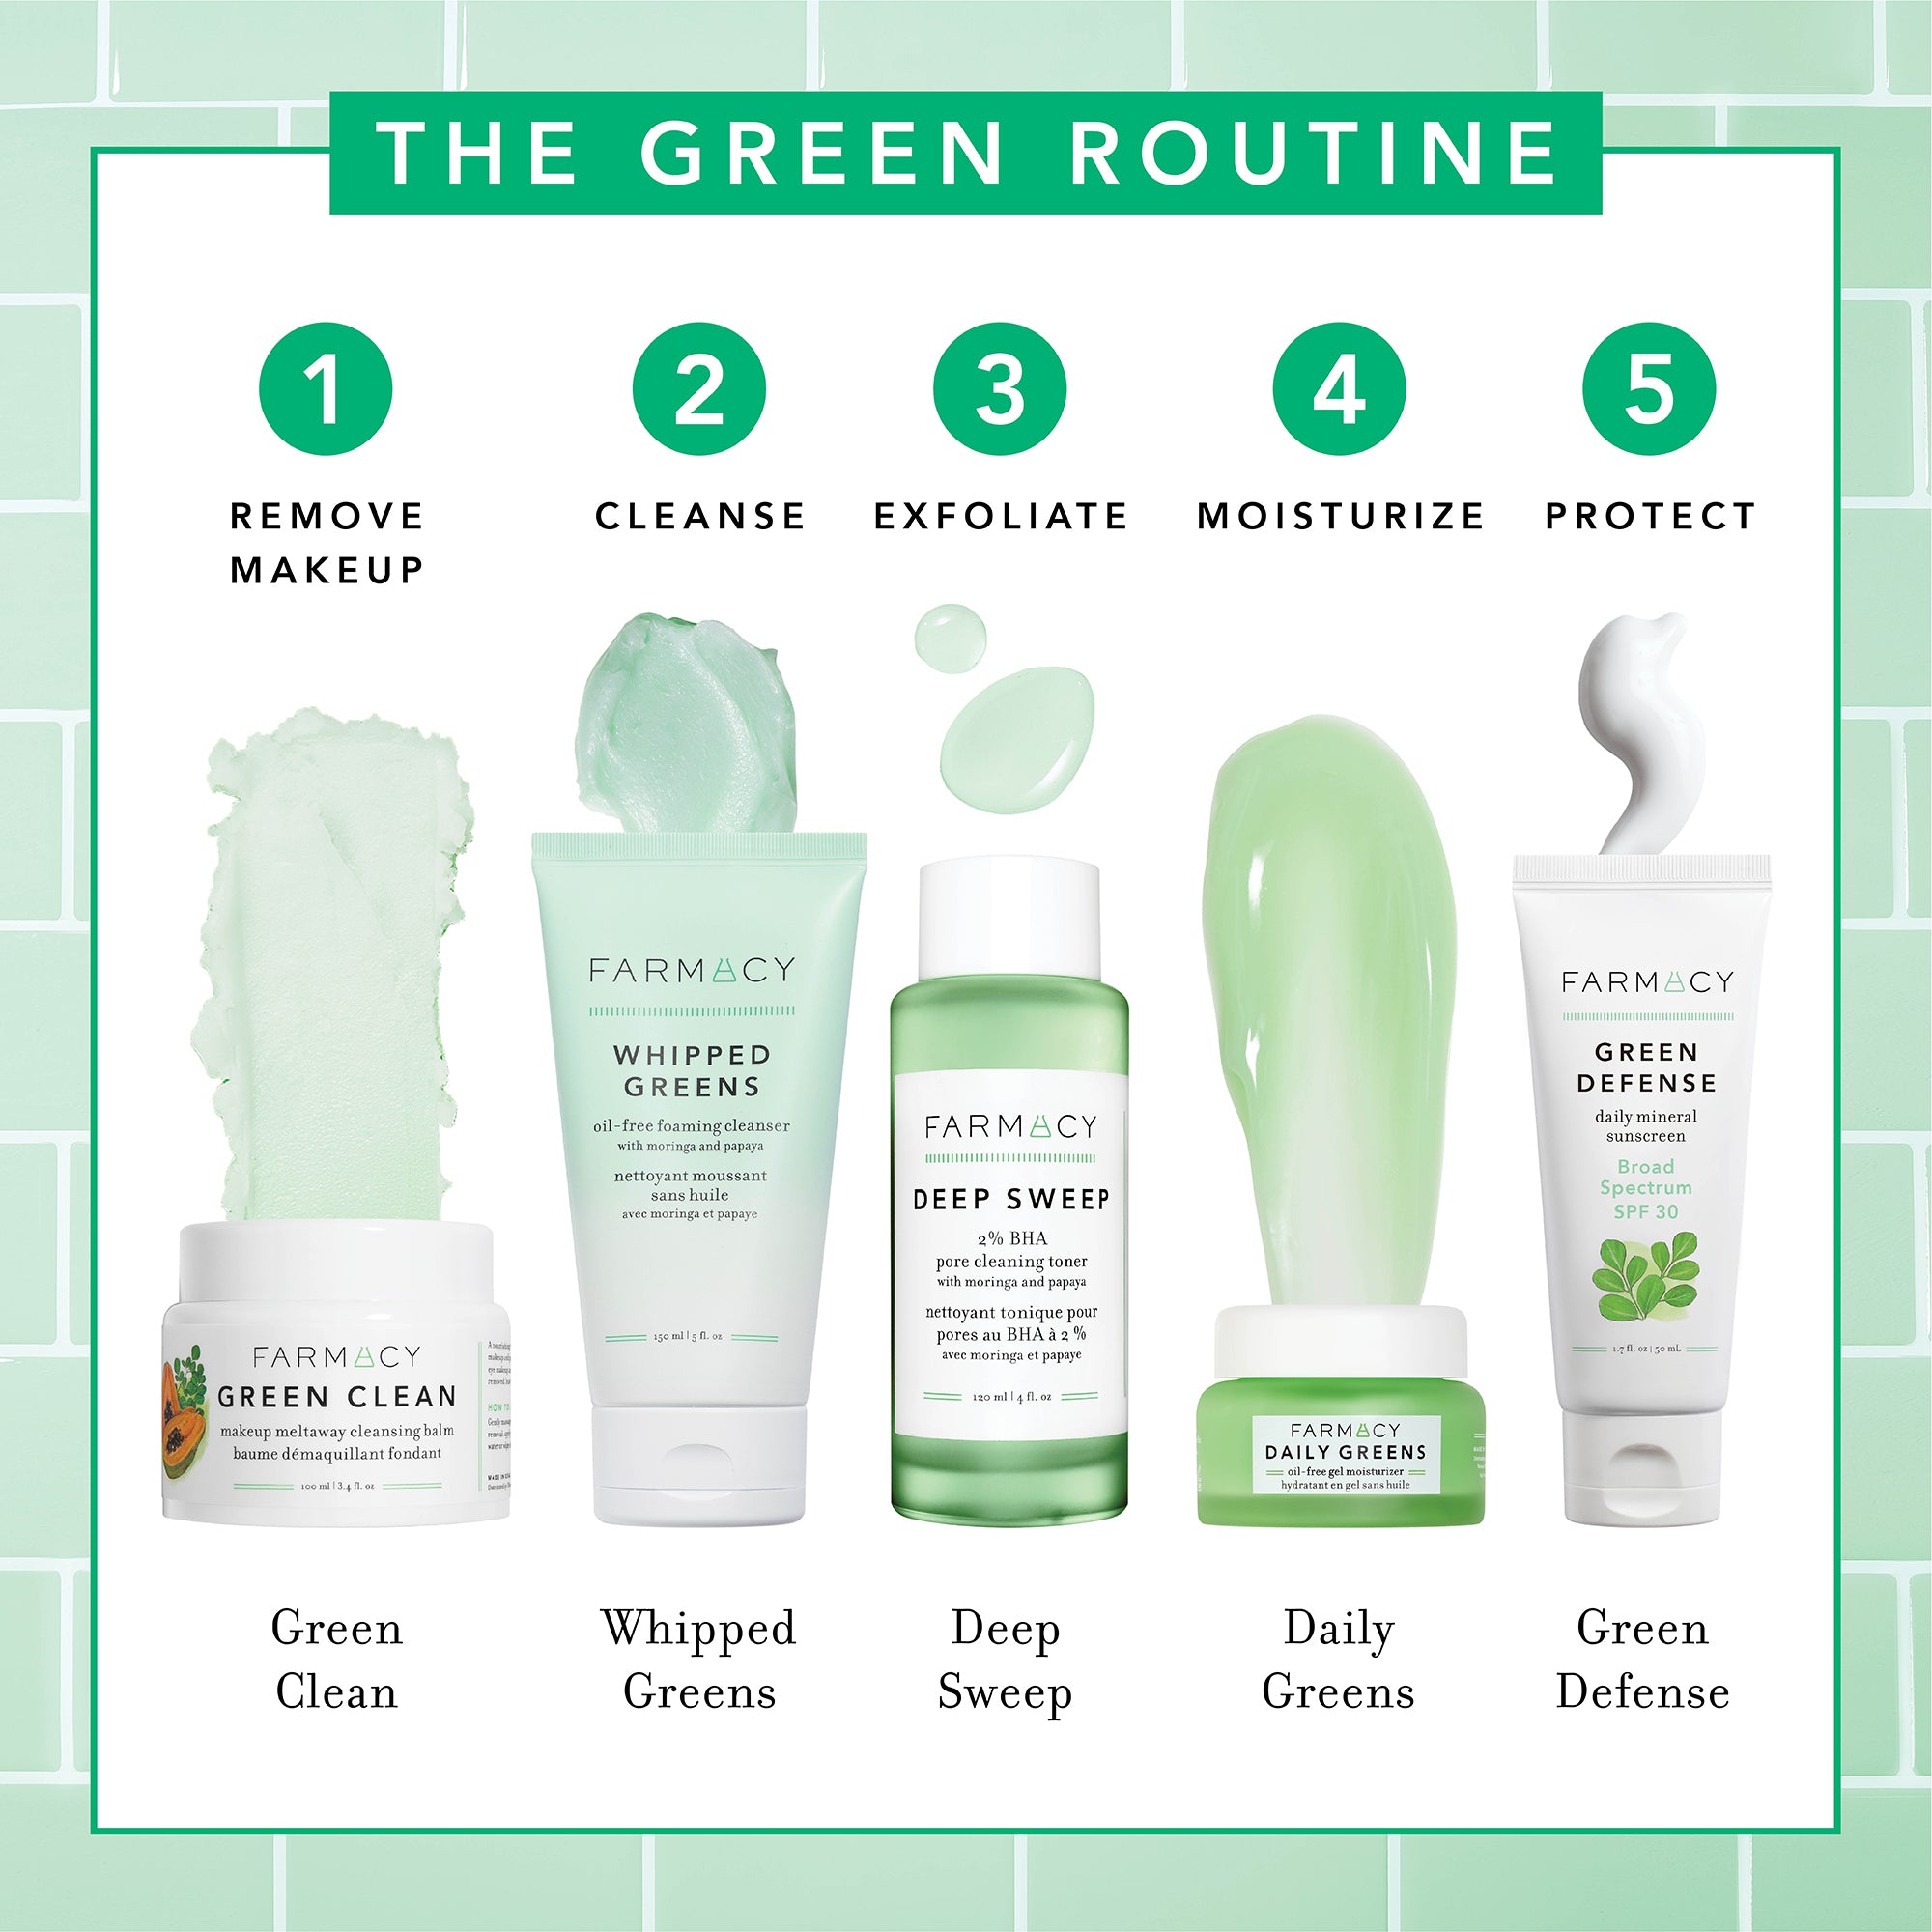 The Green Routine